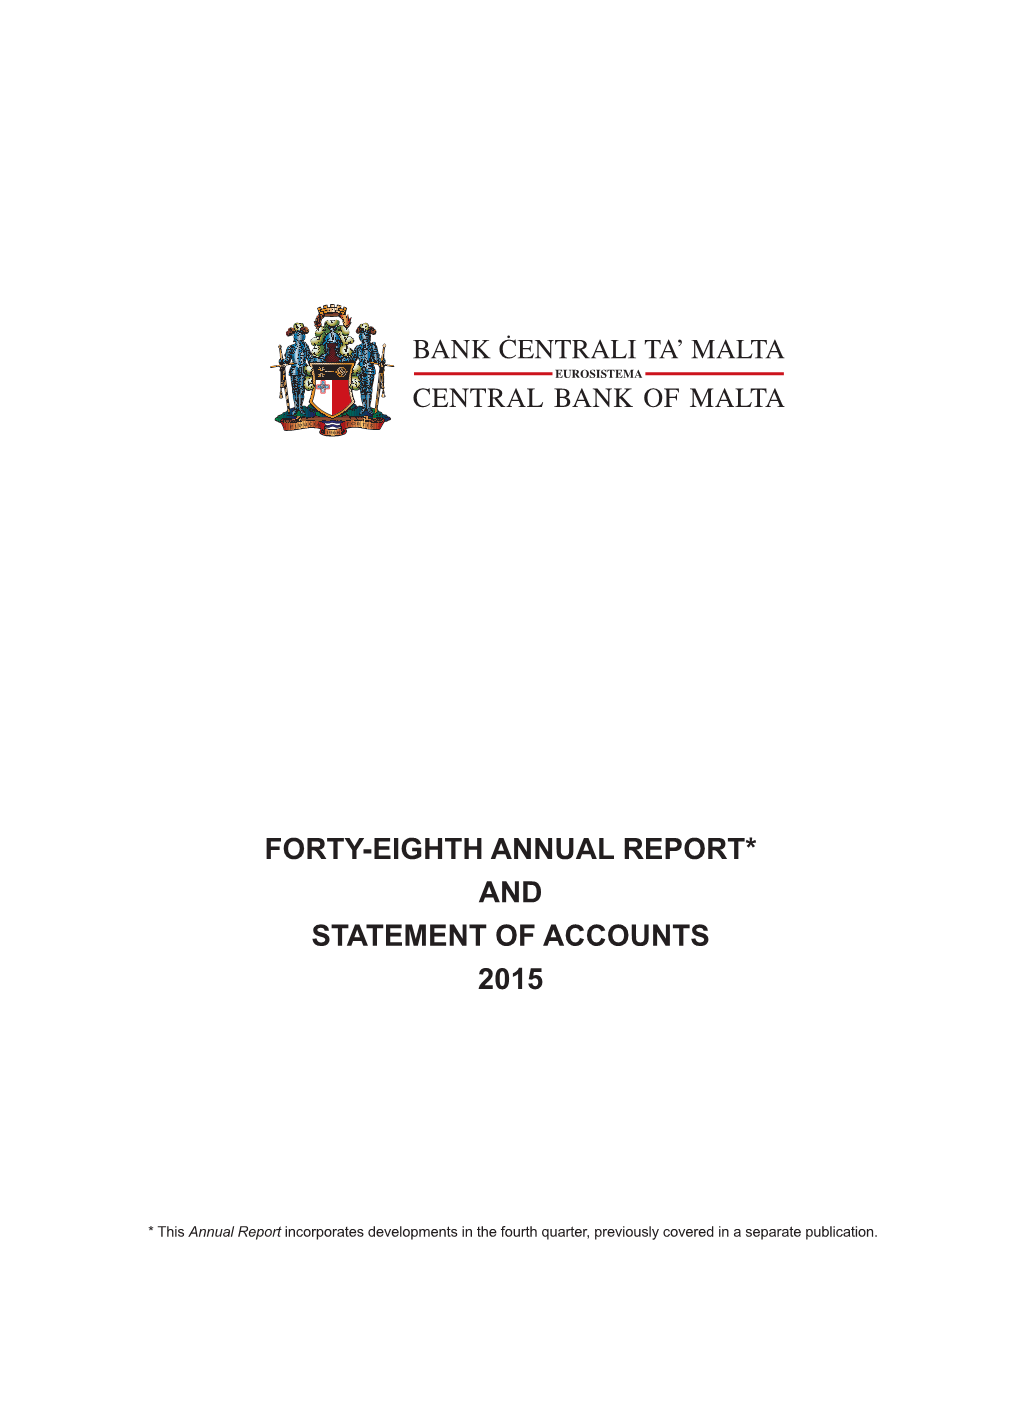 Forty-Eighth Annual Report* and Statement of Accounts 2015